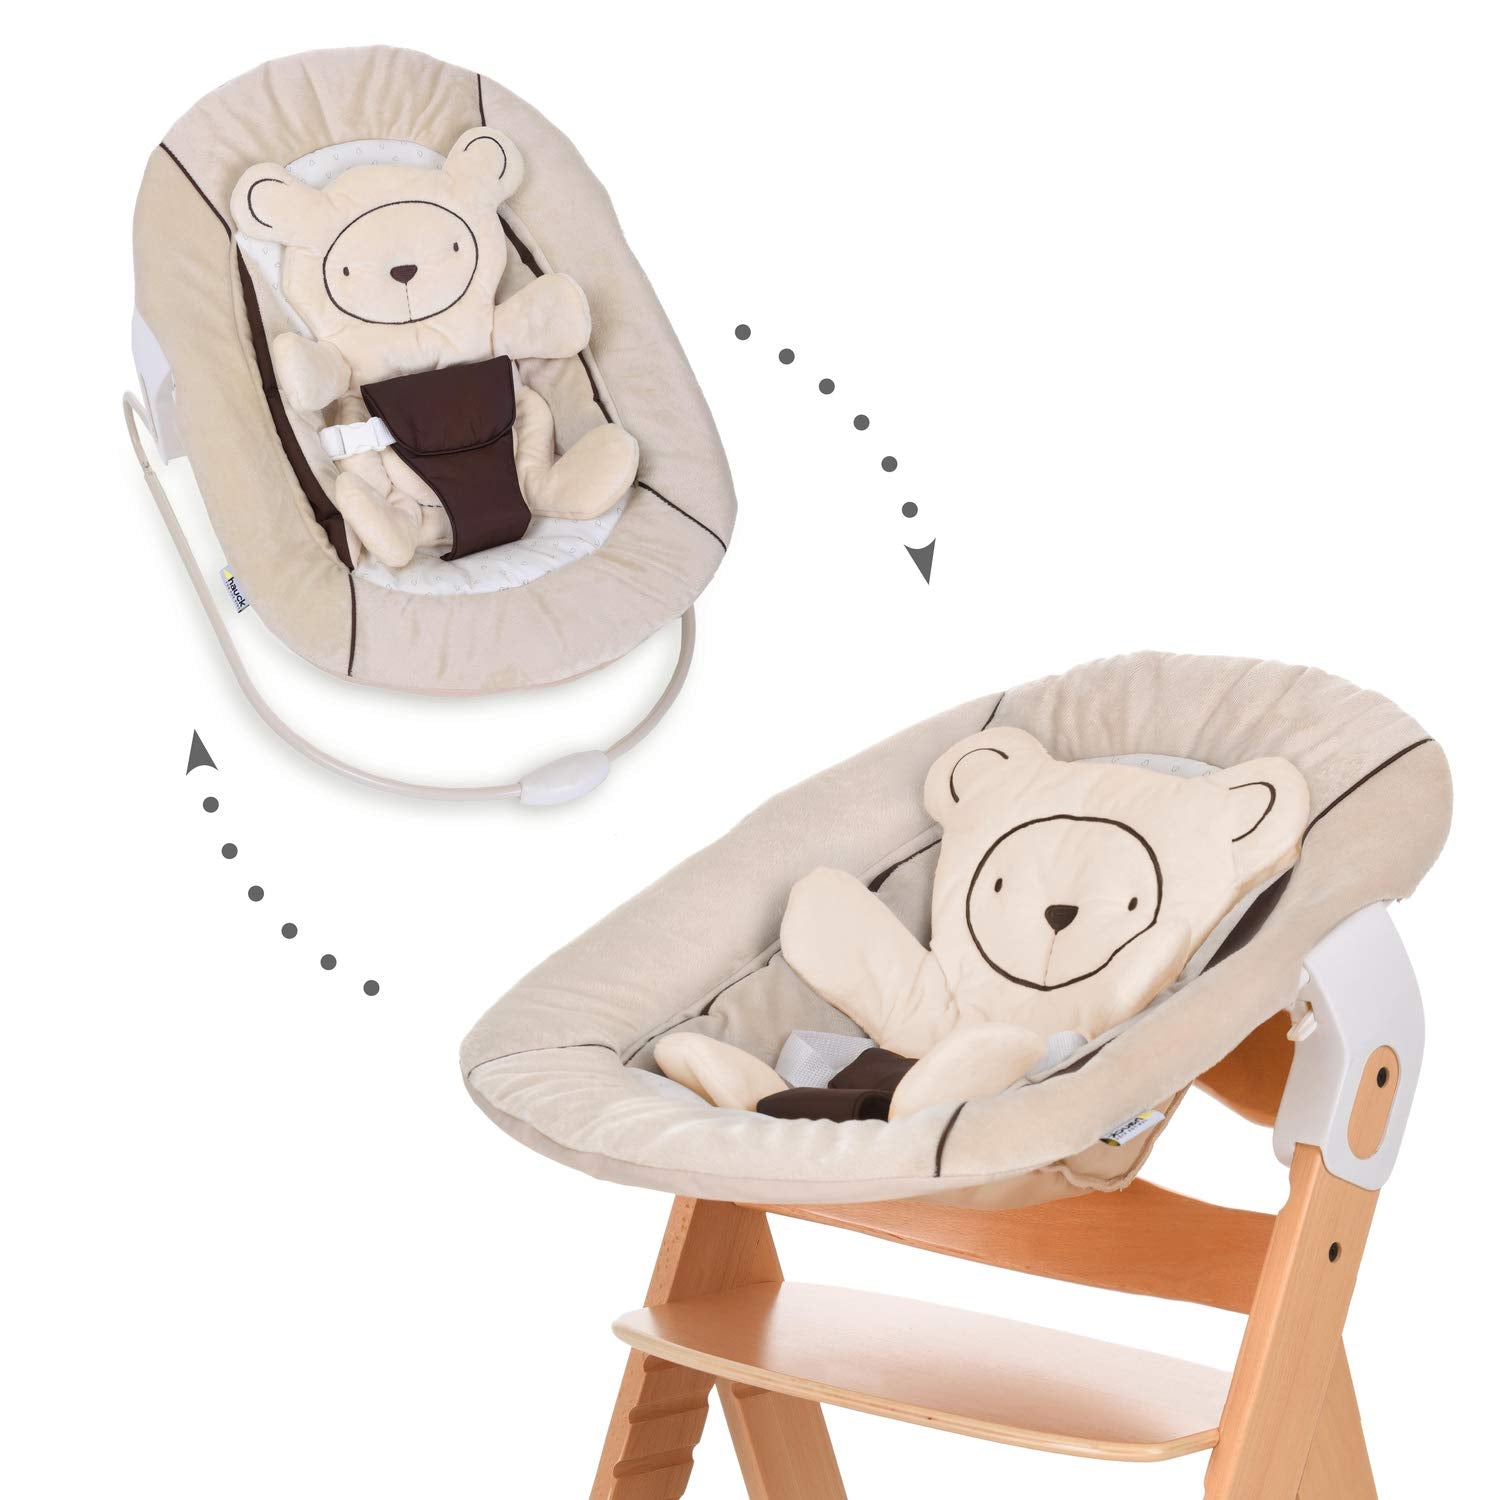 Hauck Alpha Bouncer 2-in-1 Newborn Set, Cosy Baby Rocker from Birth, Compatible with Hauck Wooden Grow-Along High Chair Alpha+, Beta+, Seat Minimizer, Hearts Beige